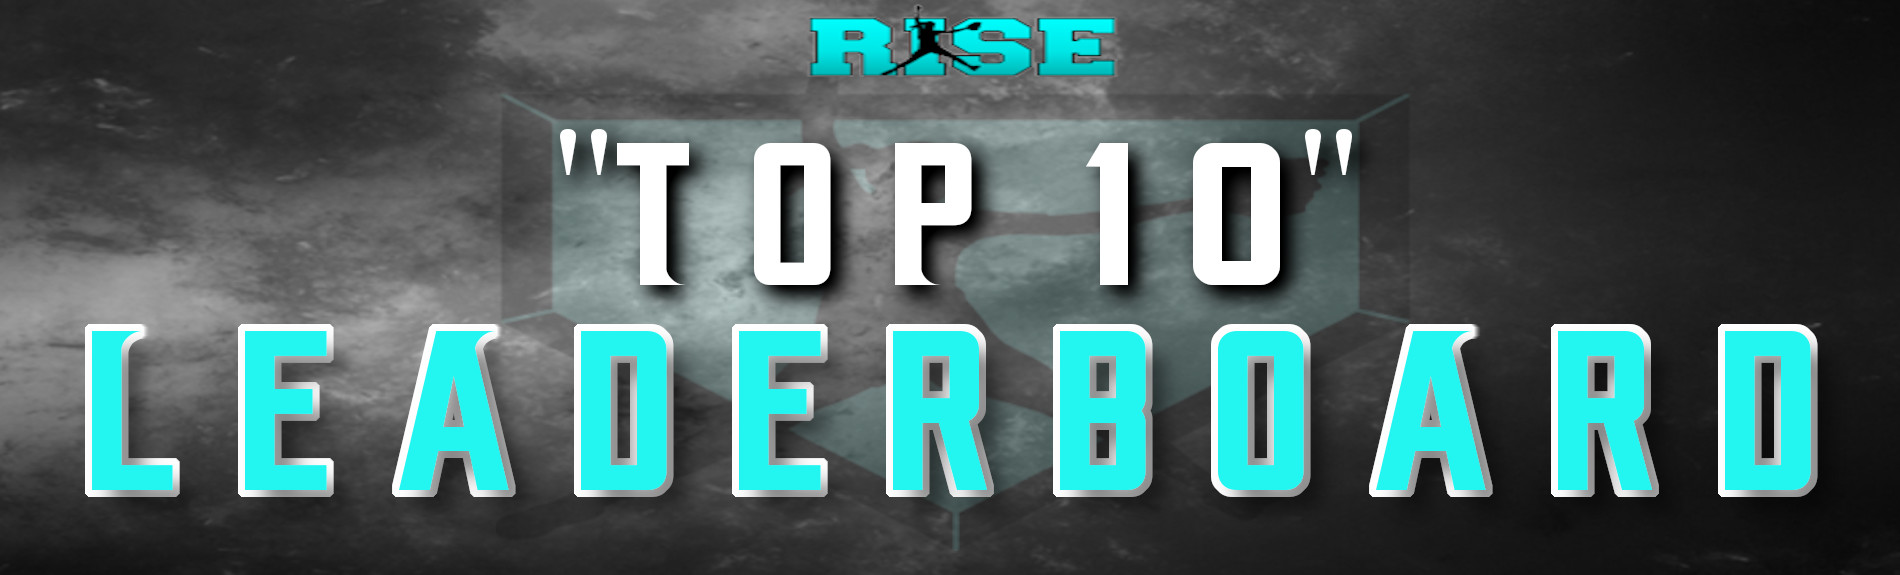 RISE “Top 10” Player Leaderboard